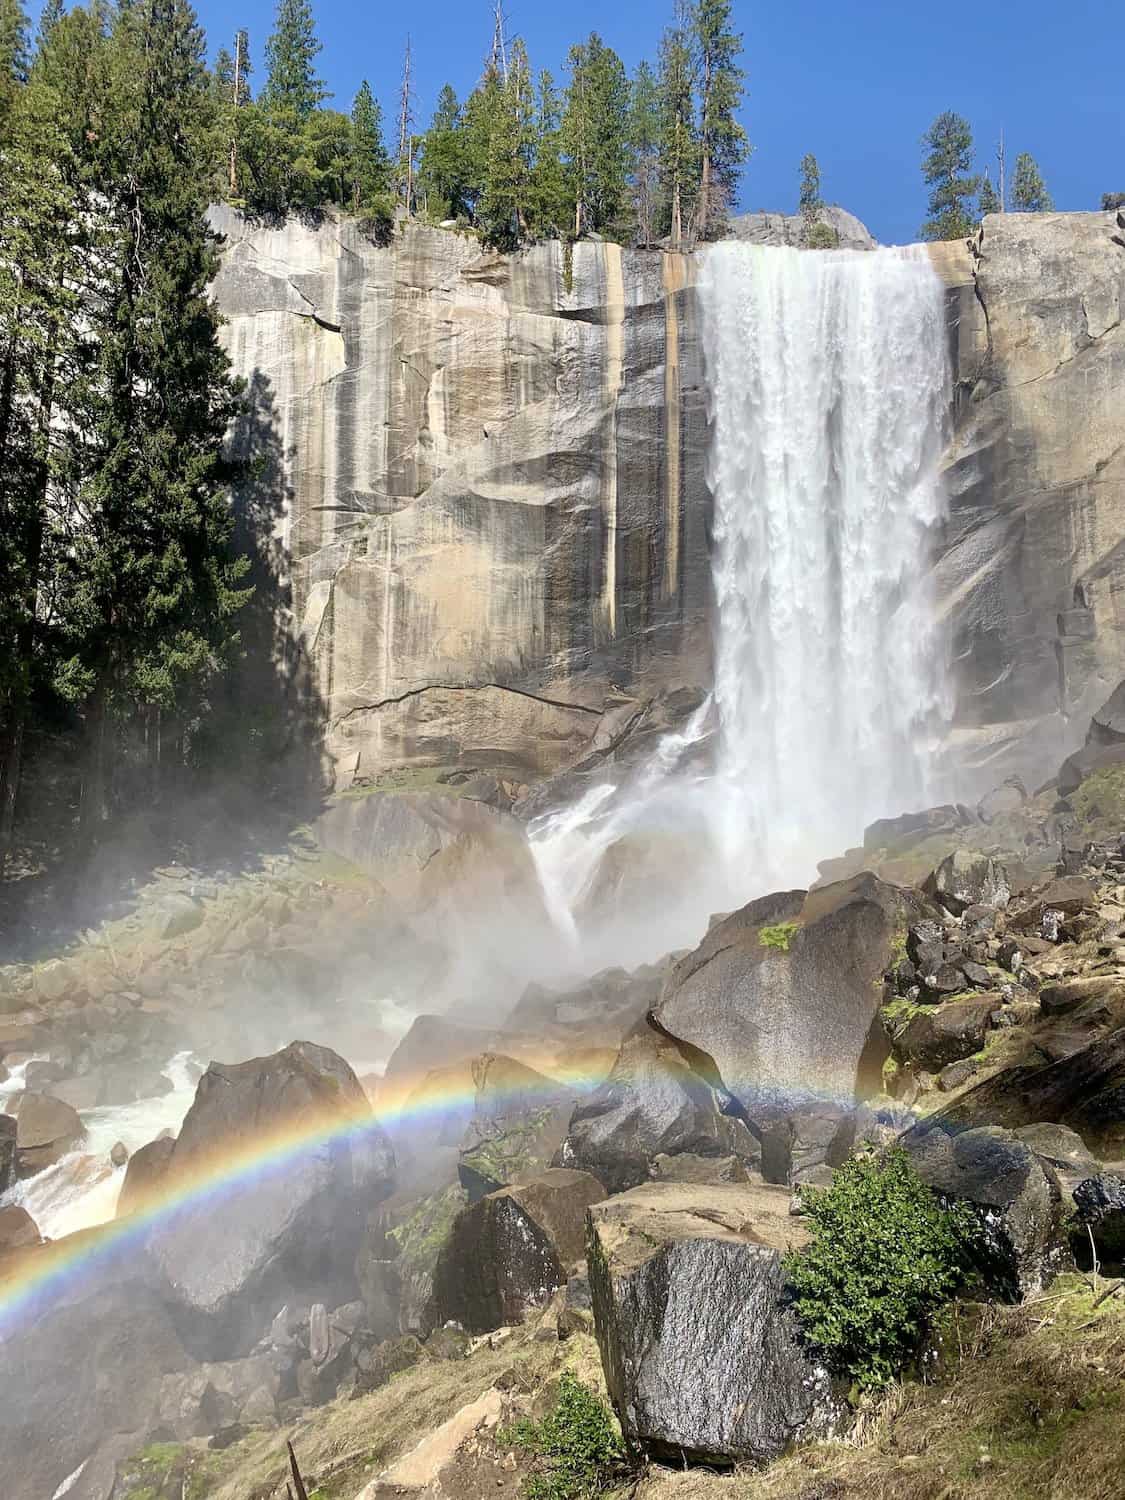 View of Vernal Falls with a rainbow